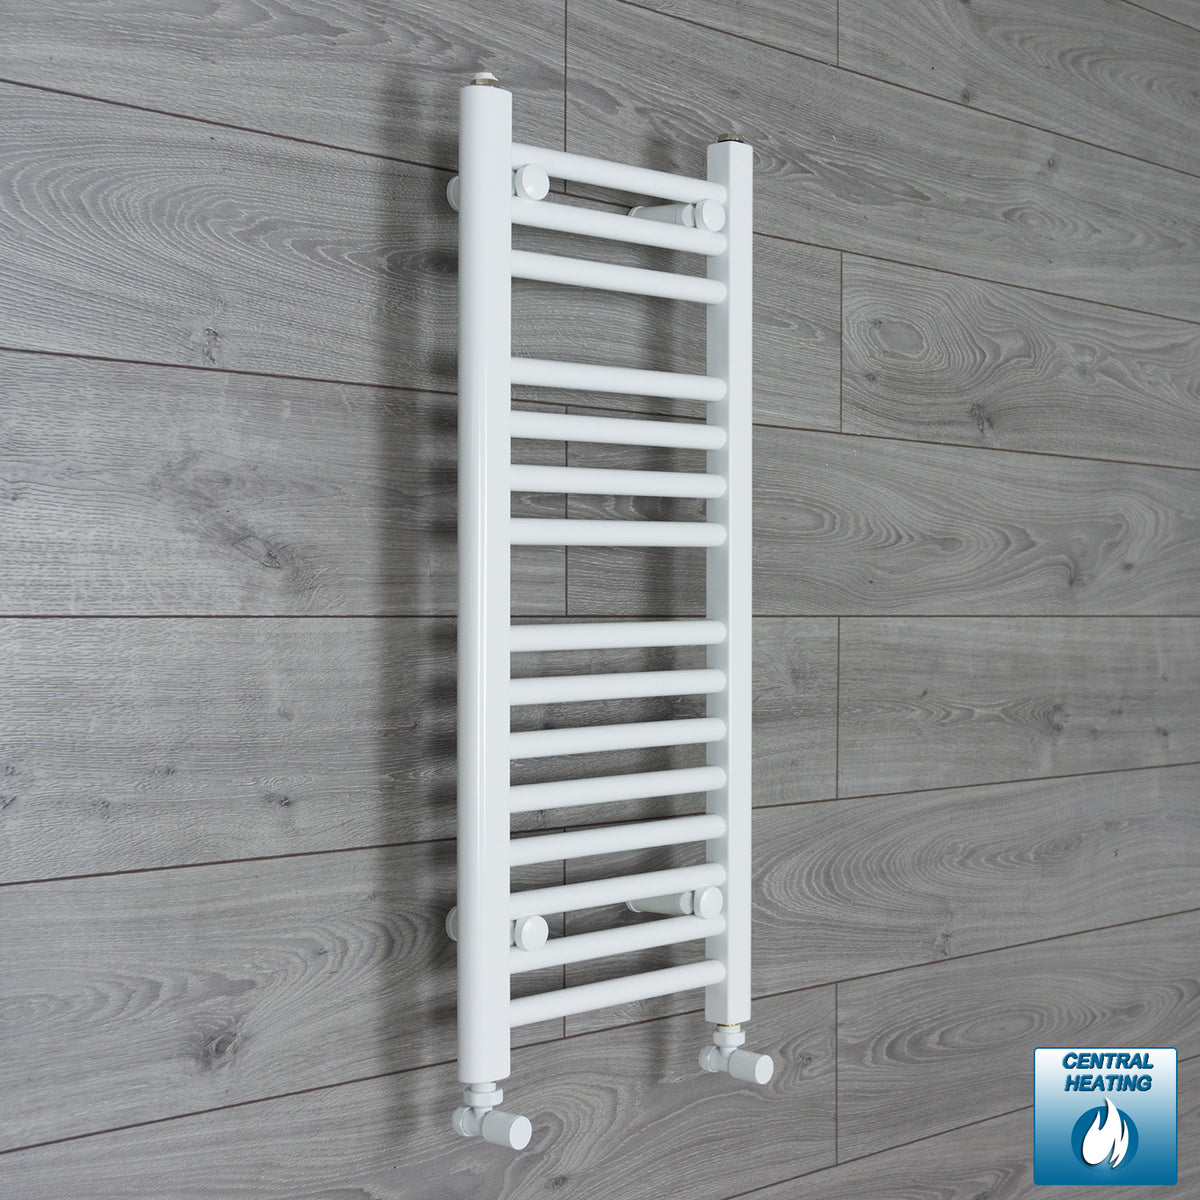 300mm Wide 800mm High White Towel Rail Radiator With Angled Valve